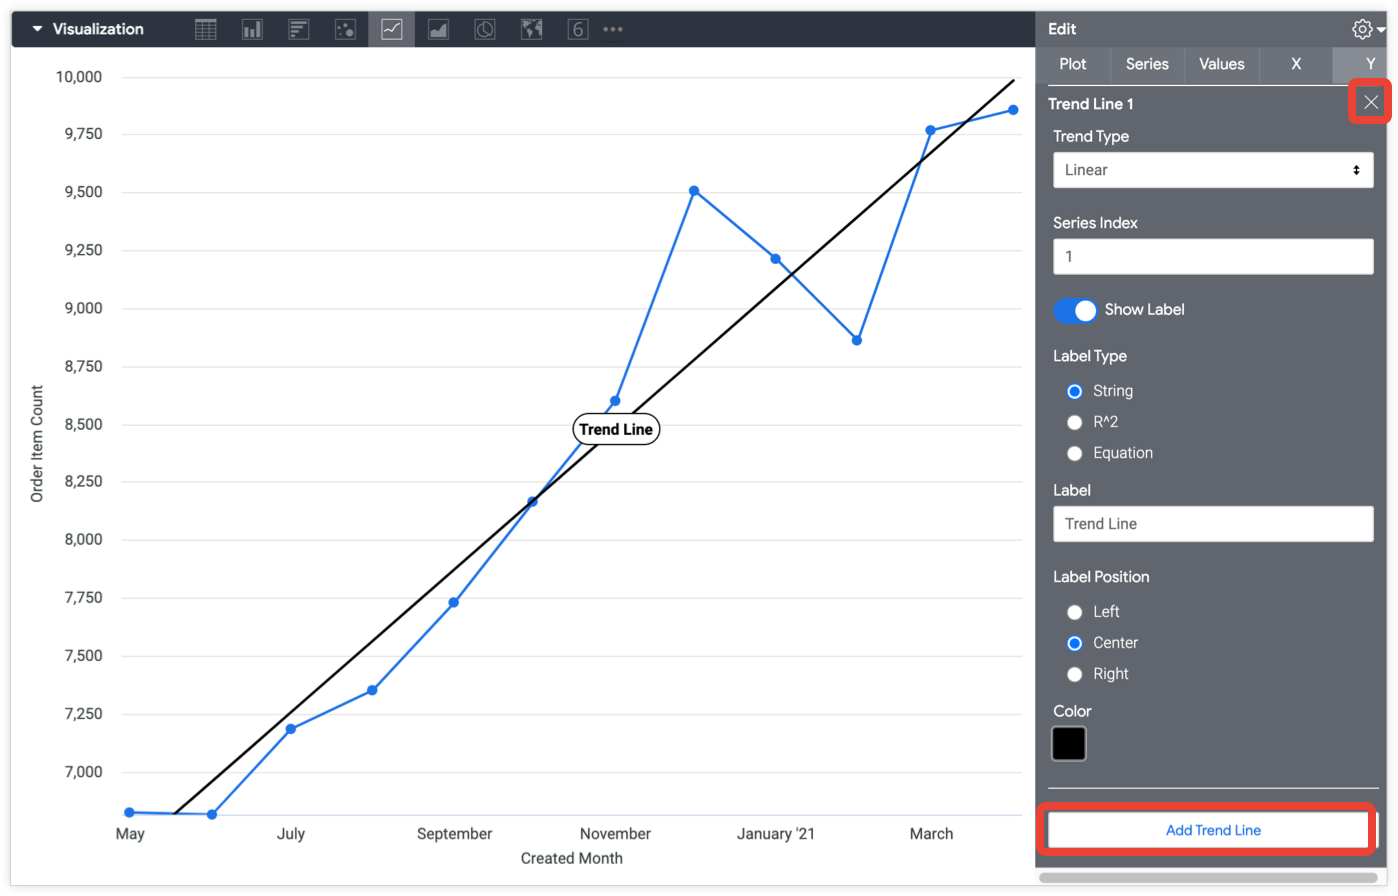 Innovative Tableau: How to Add Vertical Lines to Connect Slope Graphs